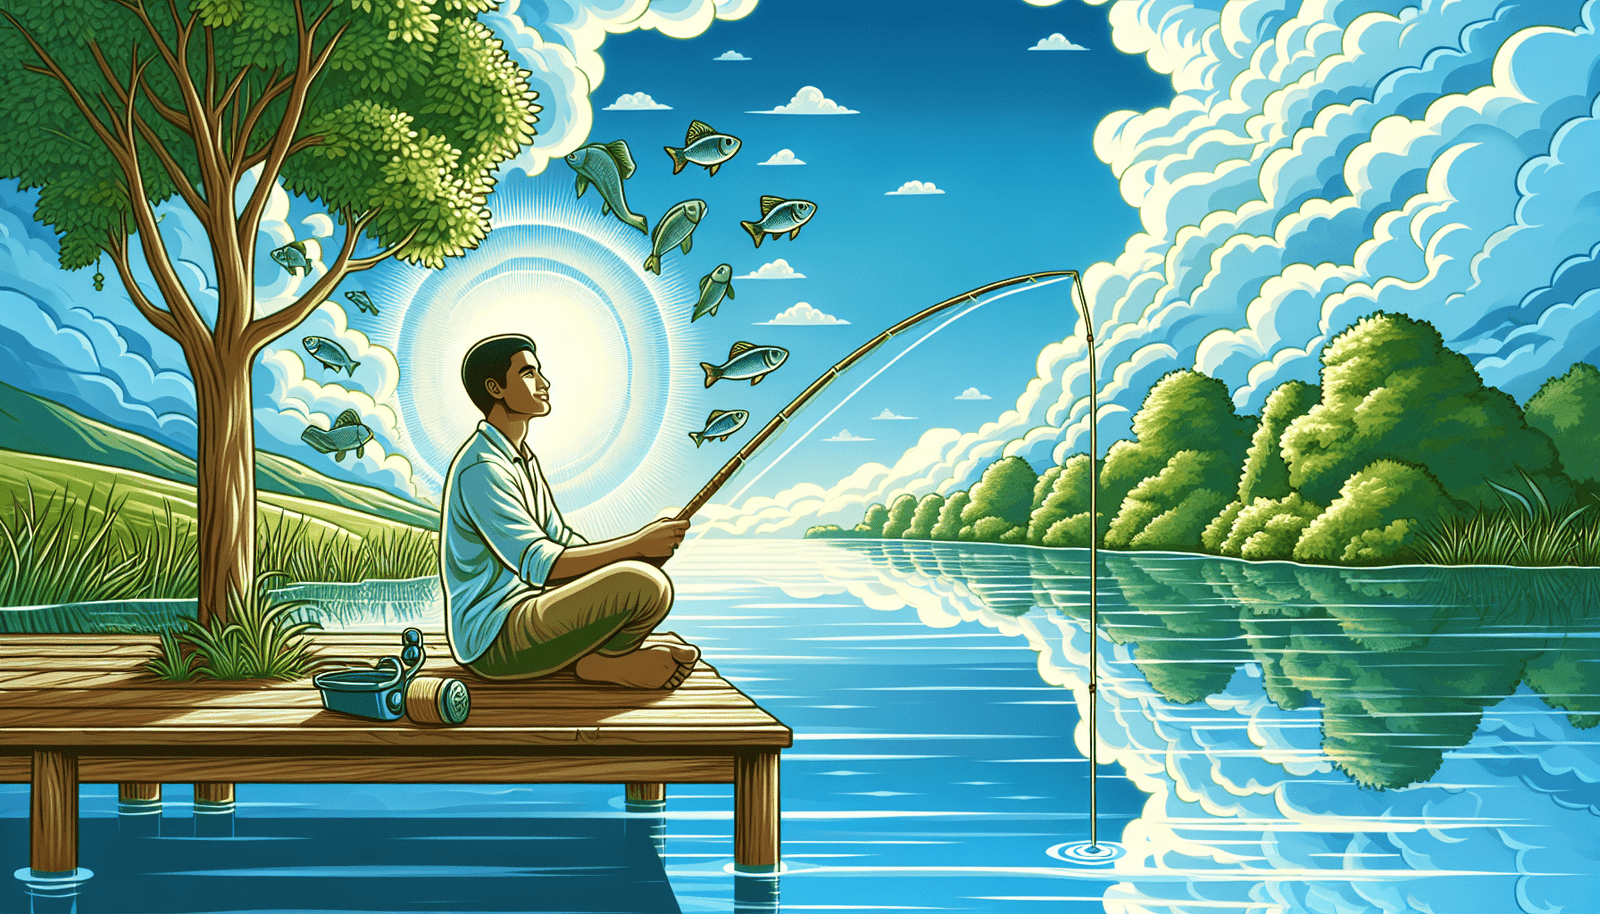 The Benefits Of Fishing: Physical, Mental, And Environmental